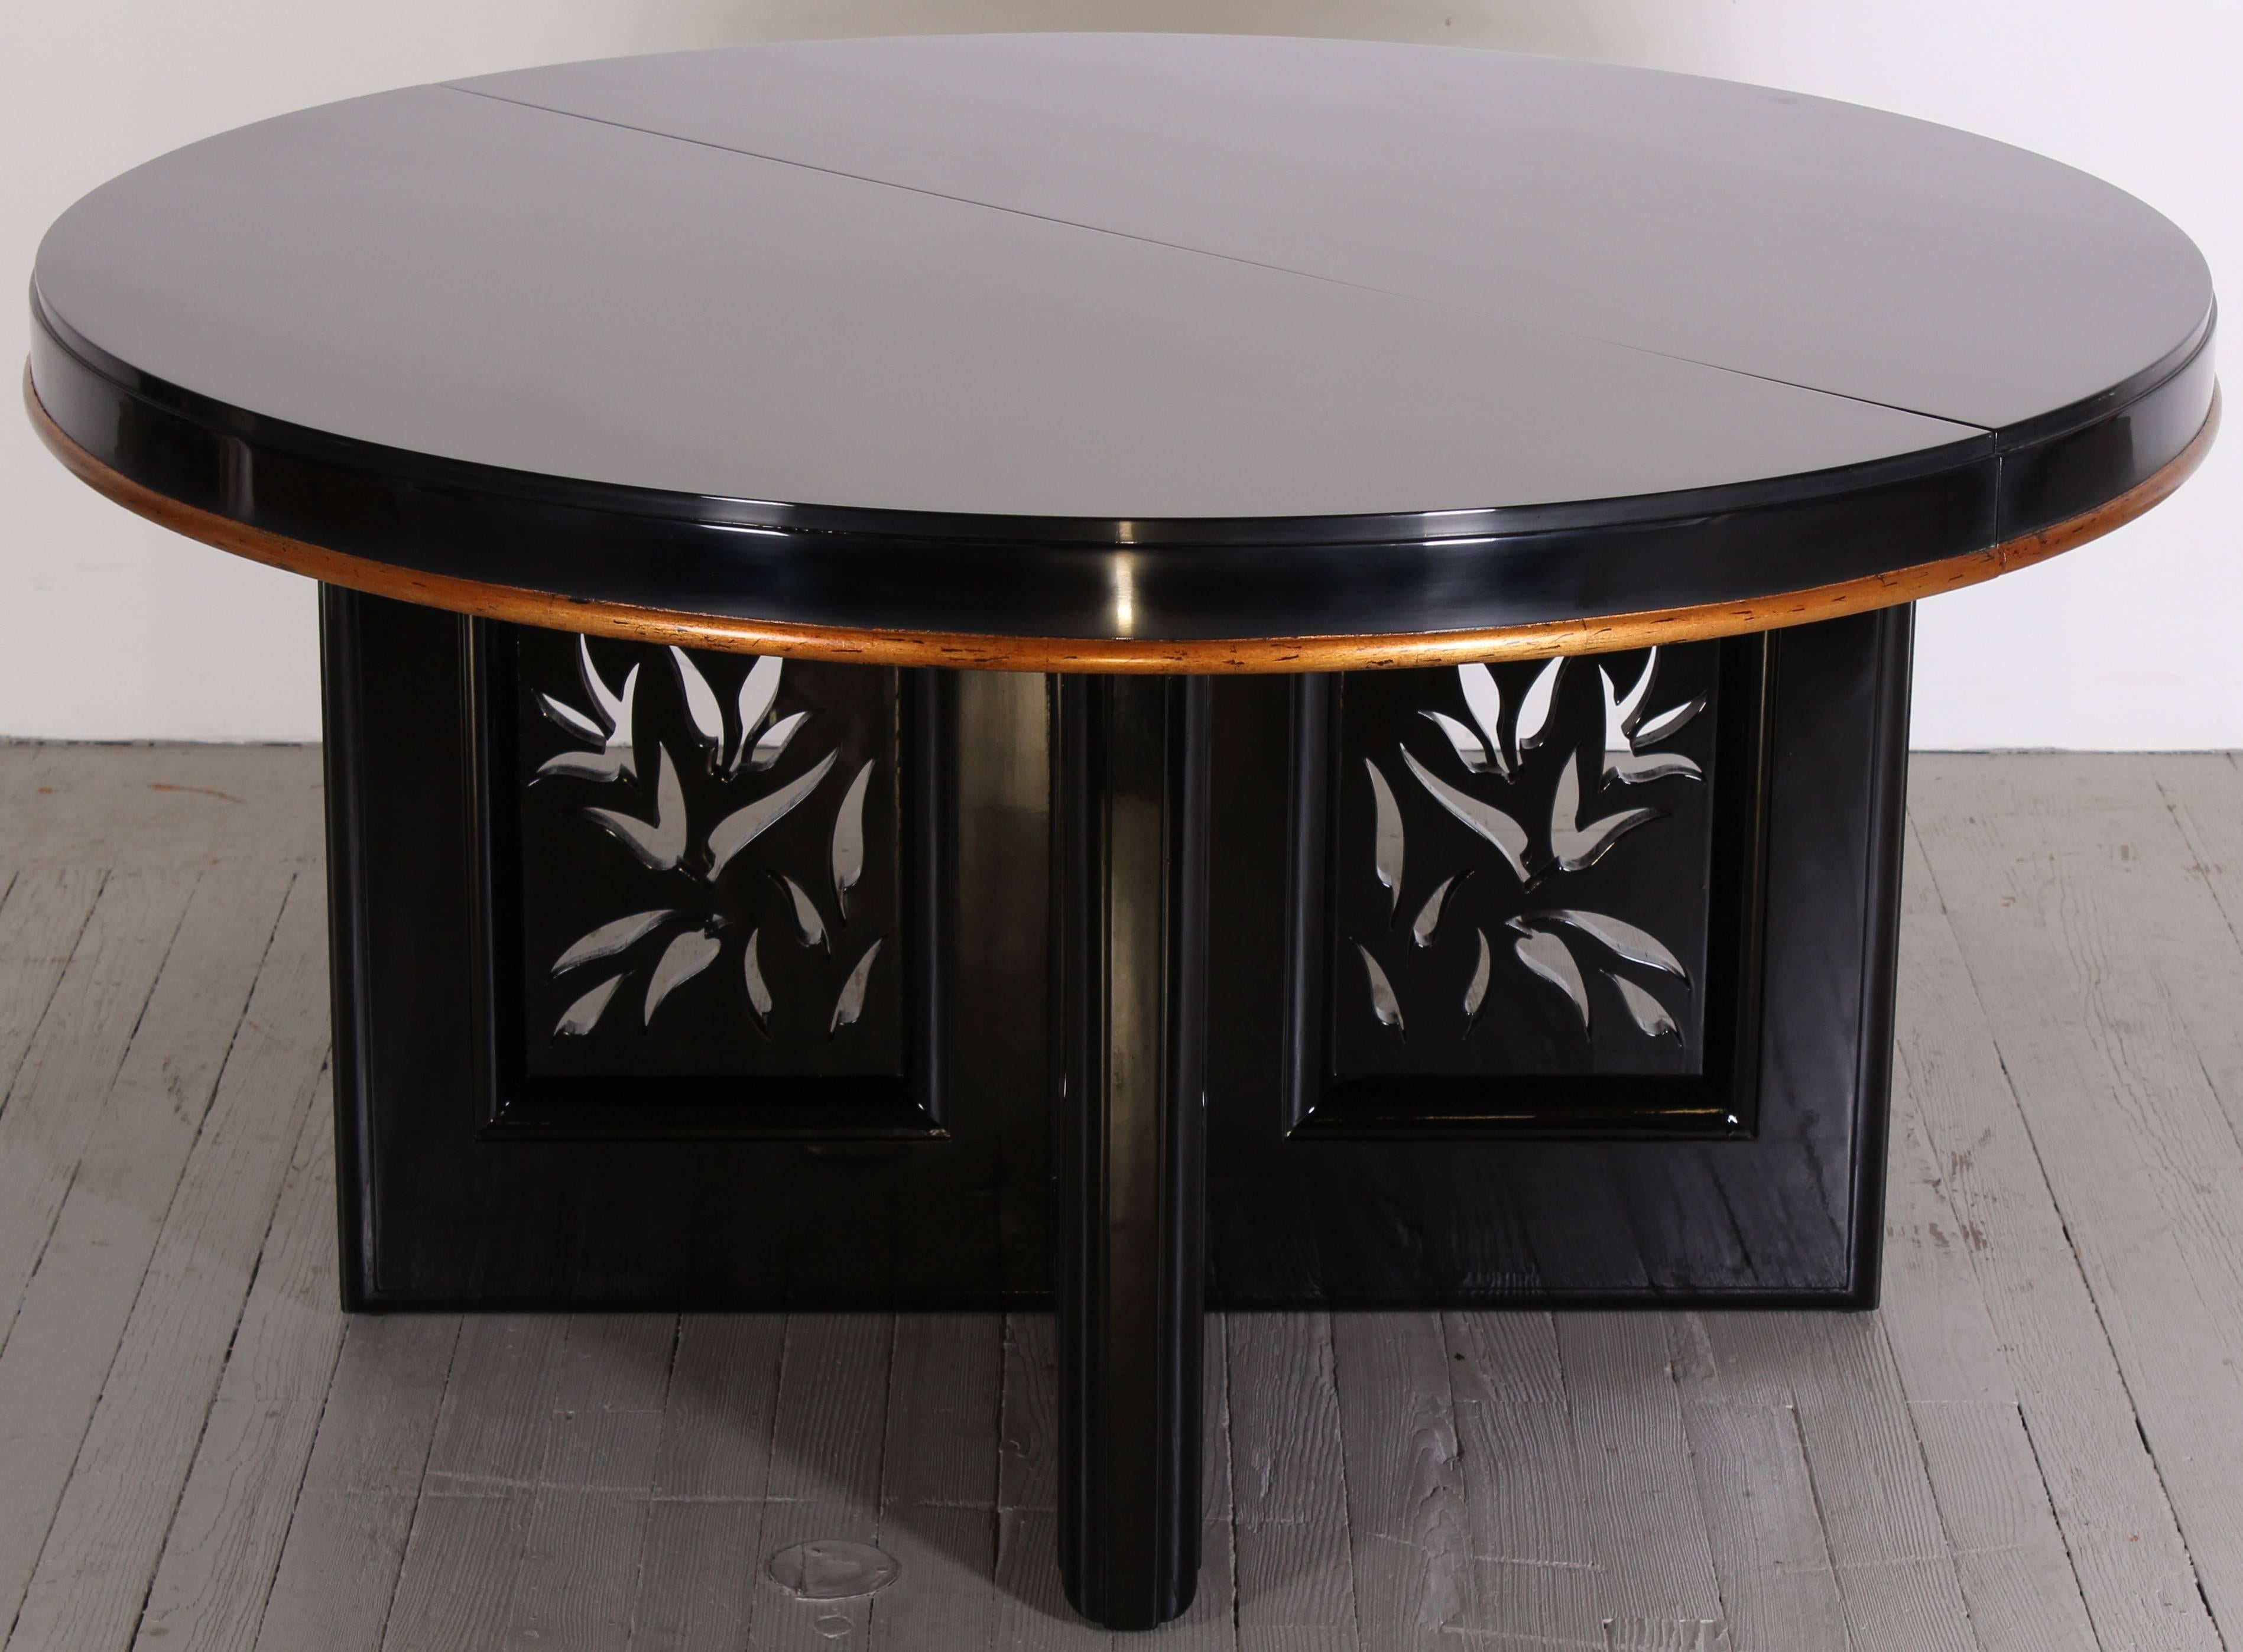 James Mont is a highly regarded designer.  His bold designs stand out in a field of 'restrained modernism'. This set models an exotic motif influenced from his childhood in Istanbul.  The dining set consists of a table with two leaves. There are